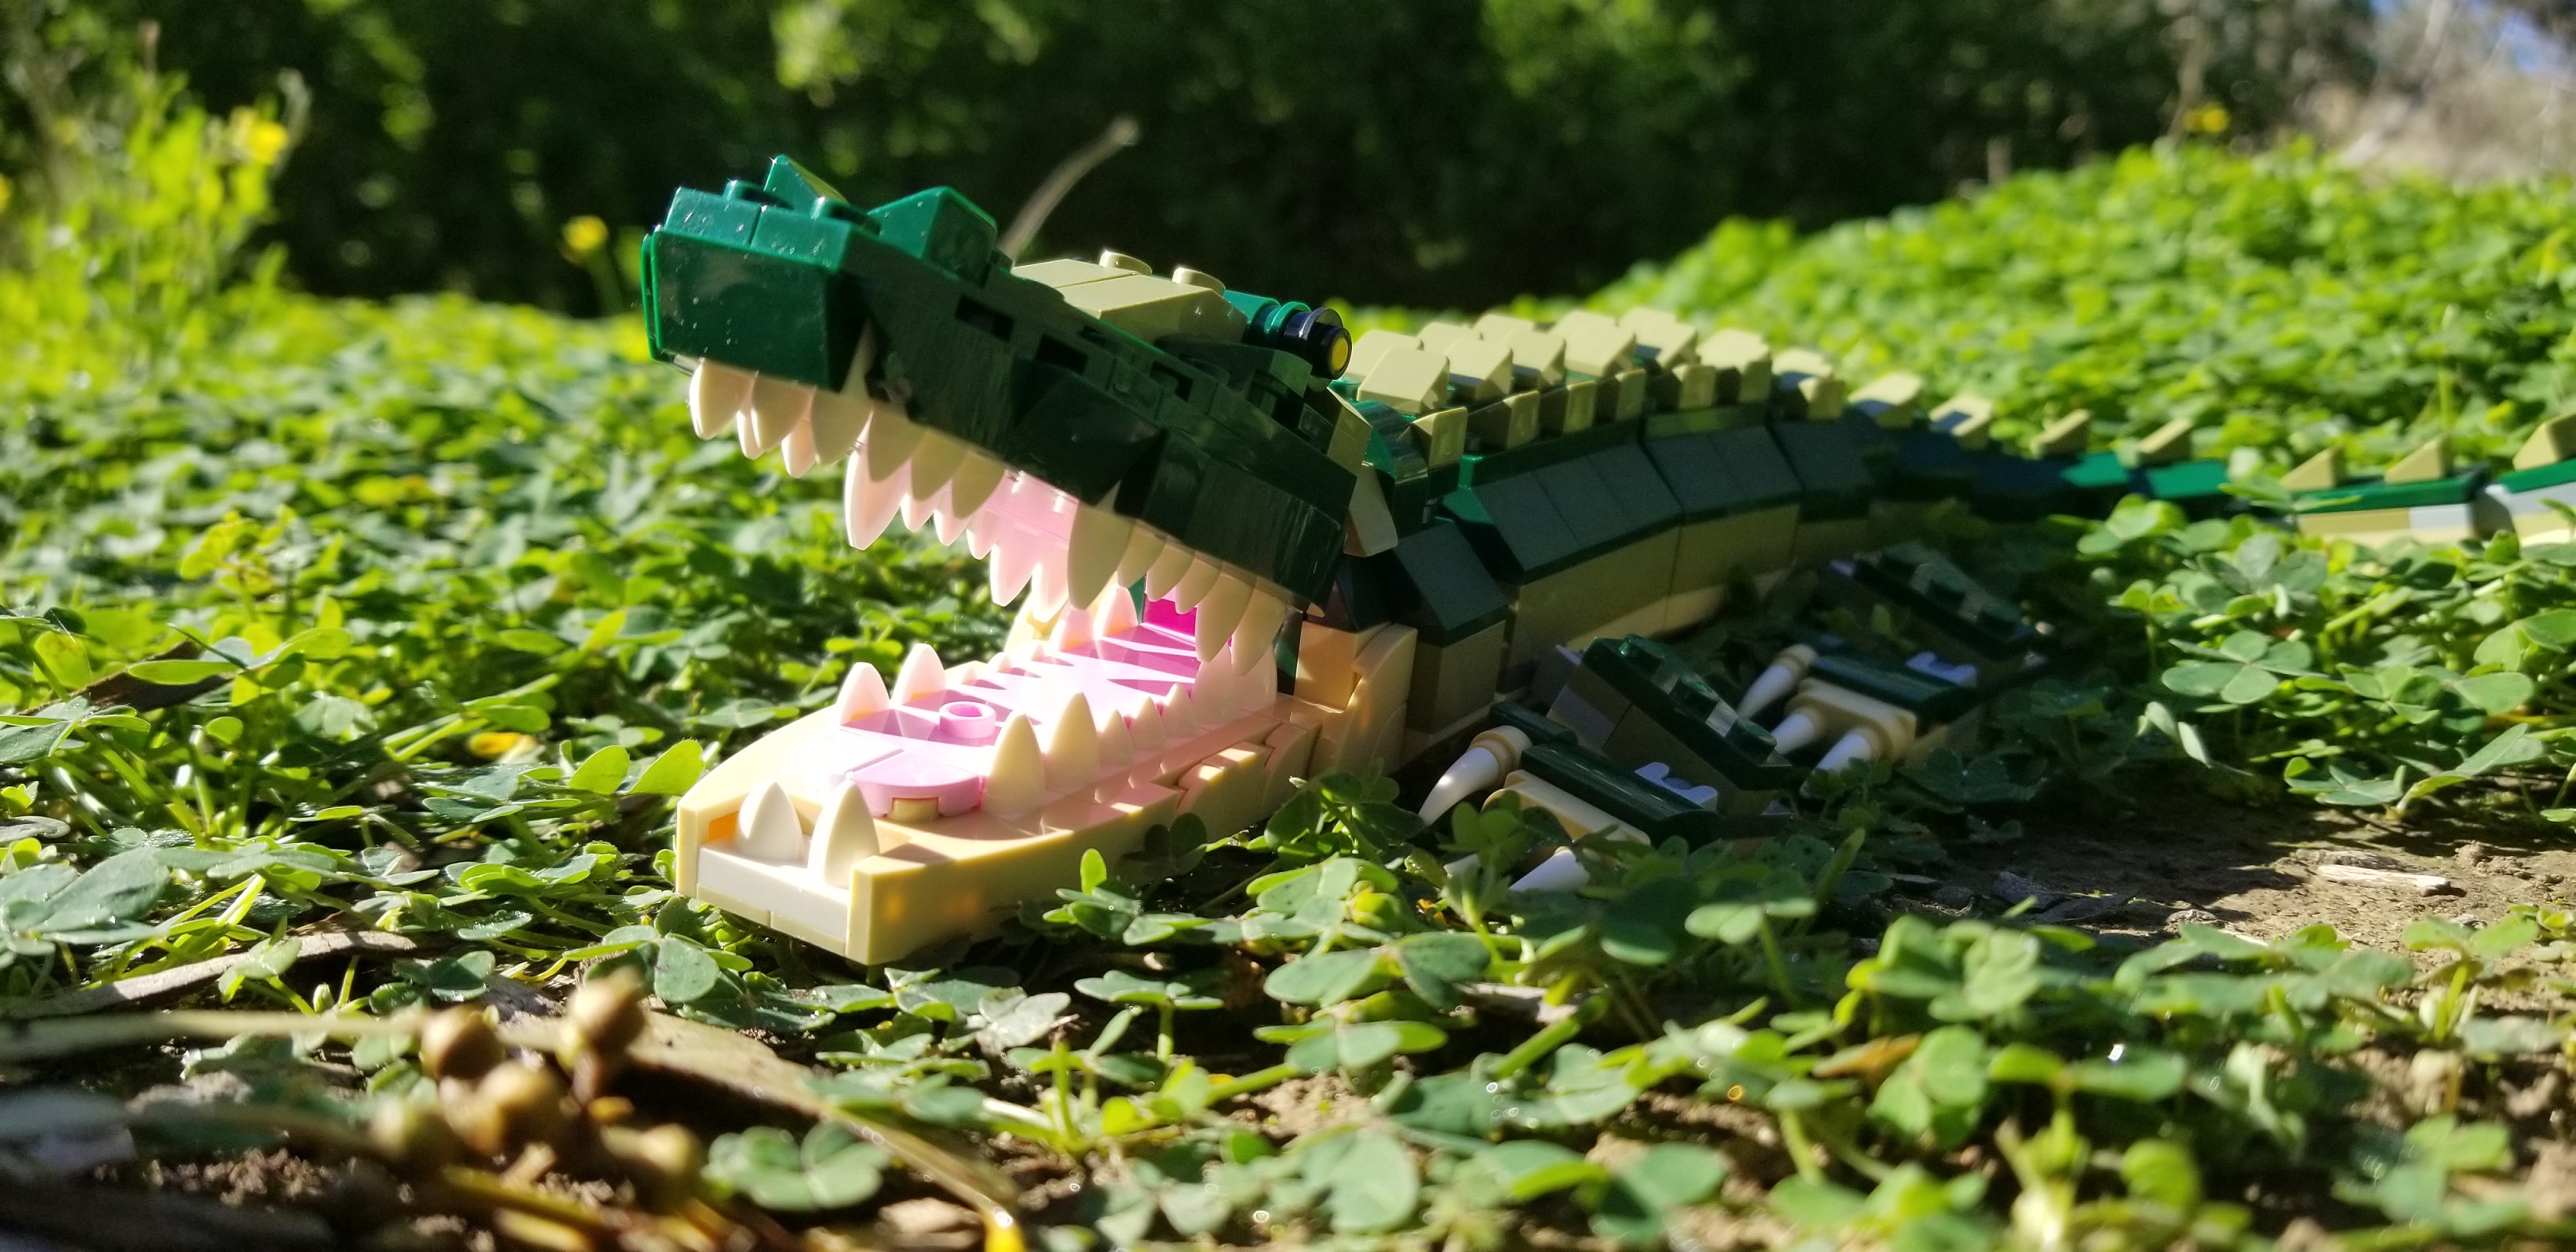 Review: LEGO 31121 Creator 3-in-1 Crocodile (Guest Review) - Jay's Blog